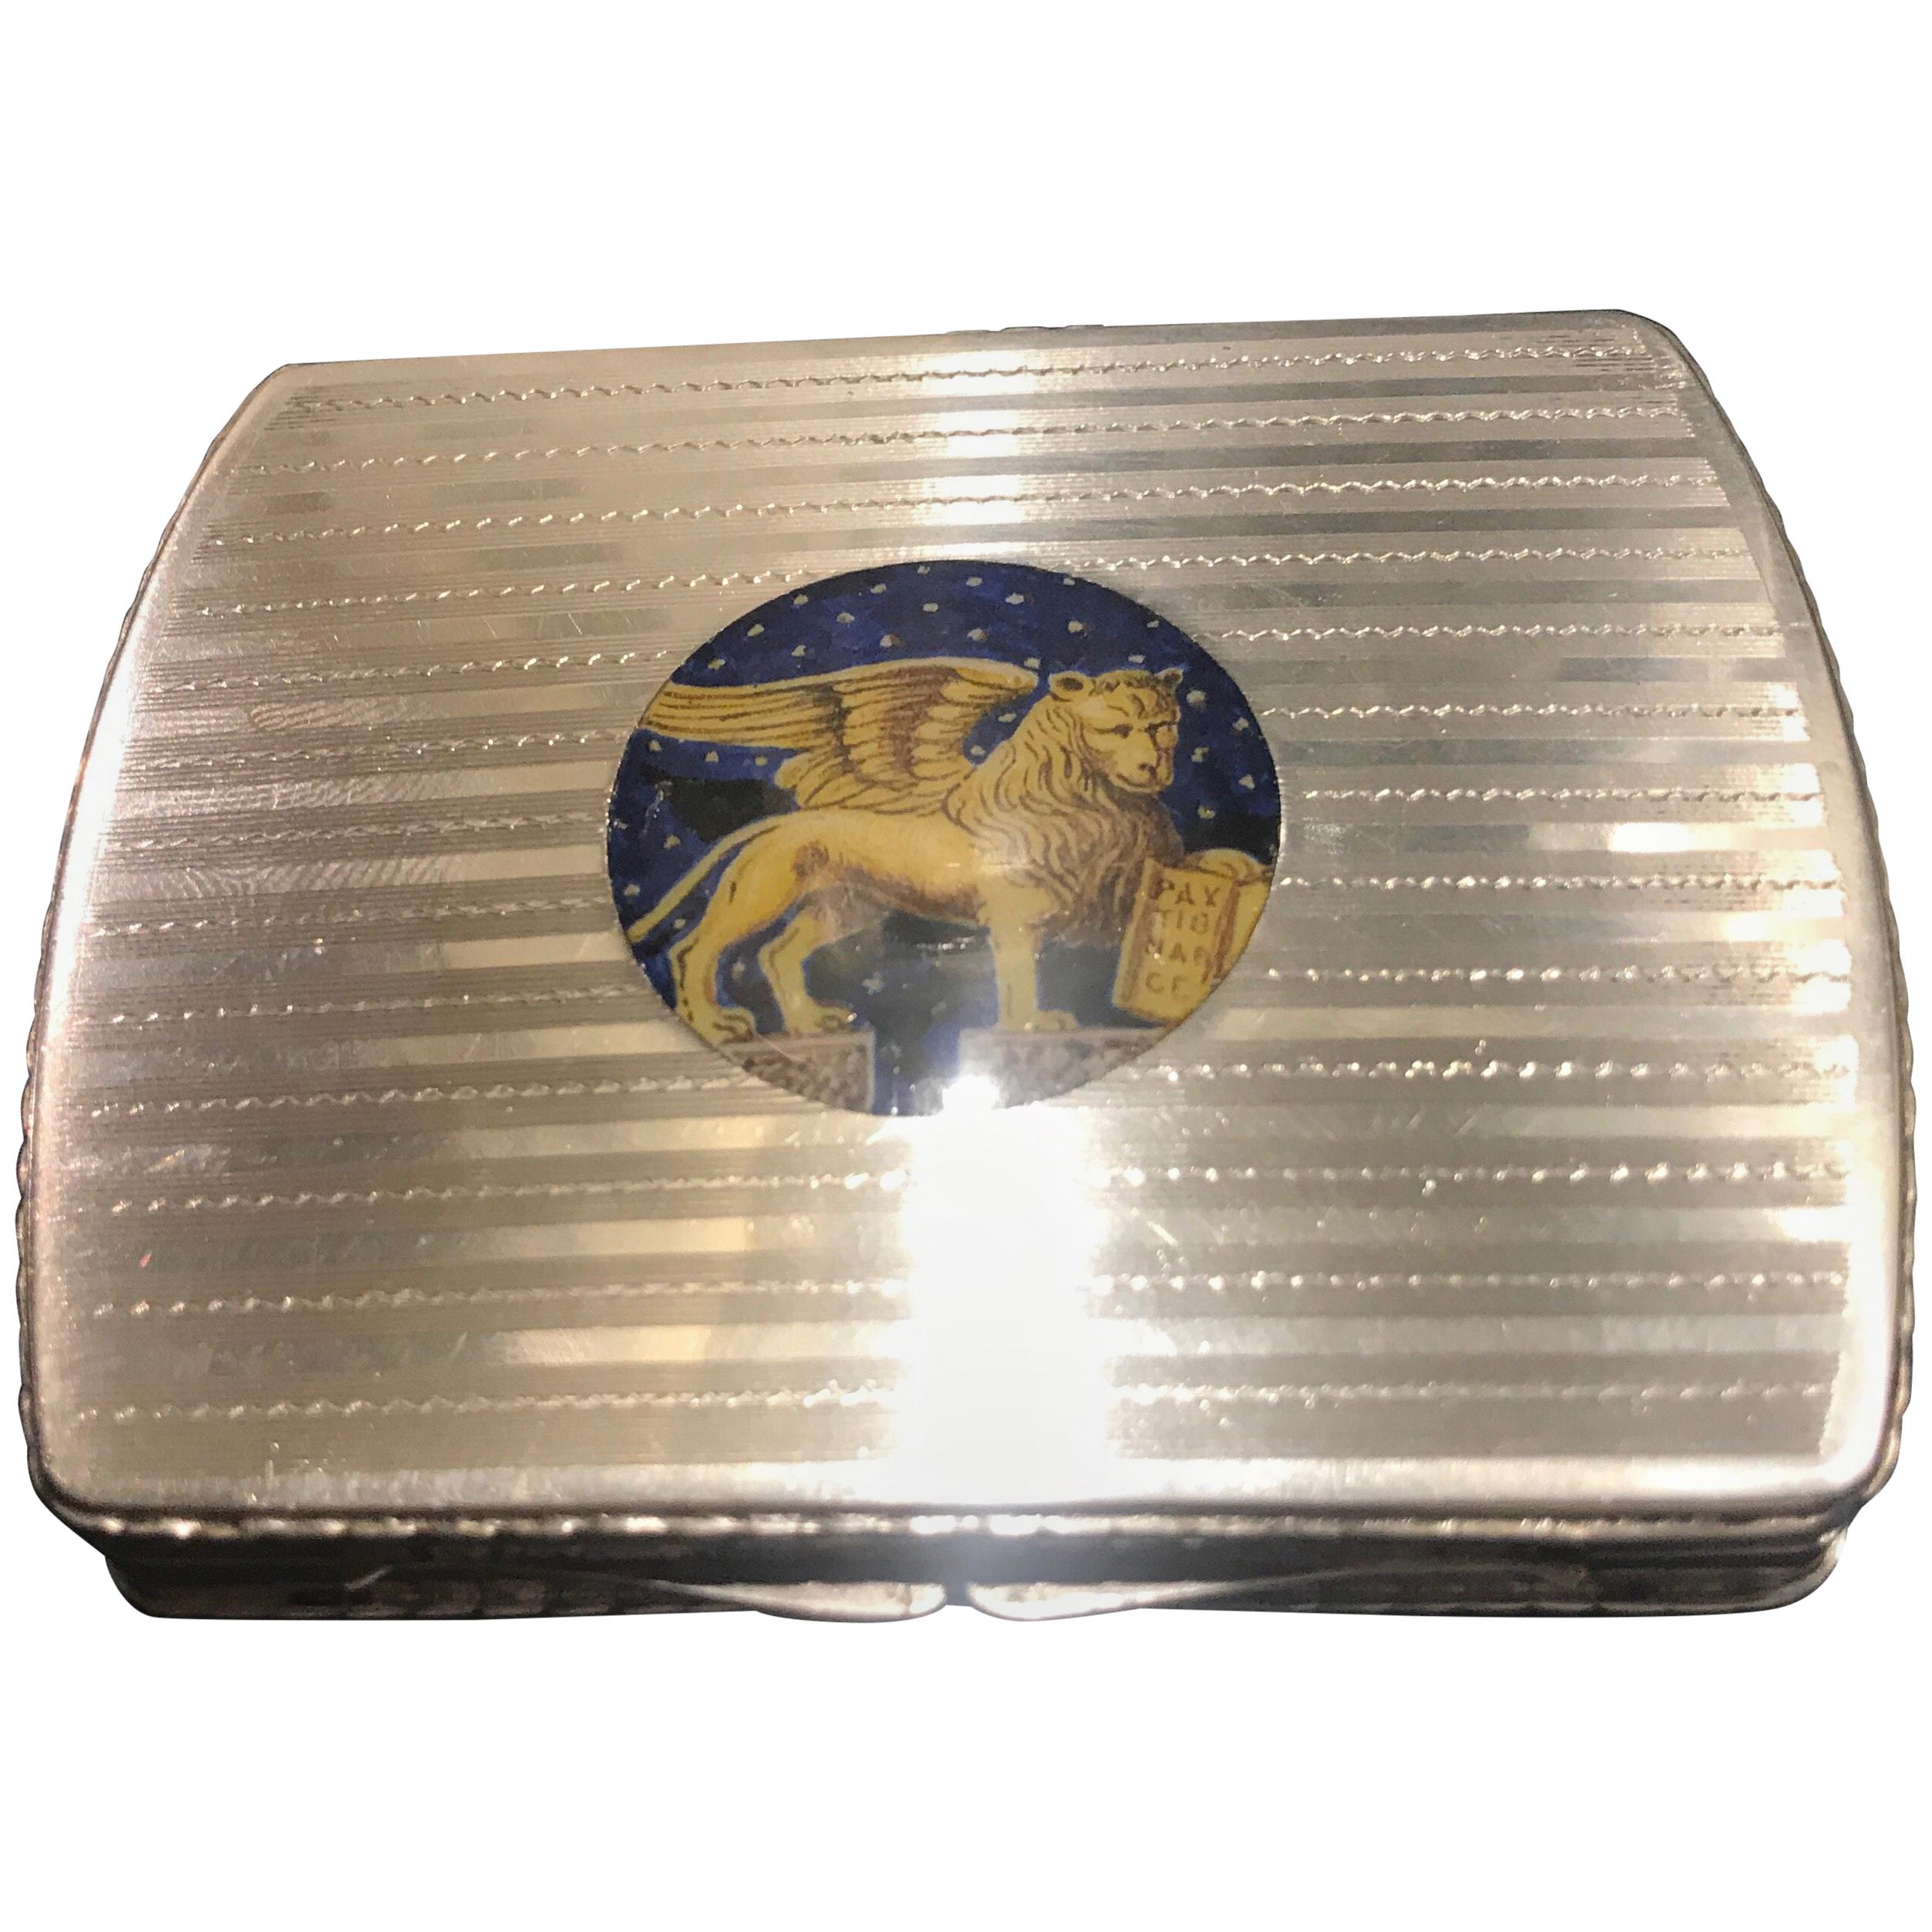 Continental Silver and Enamel Calling Card or Cigarette Case